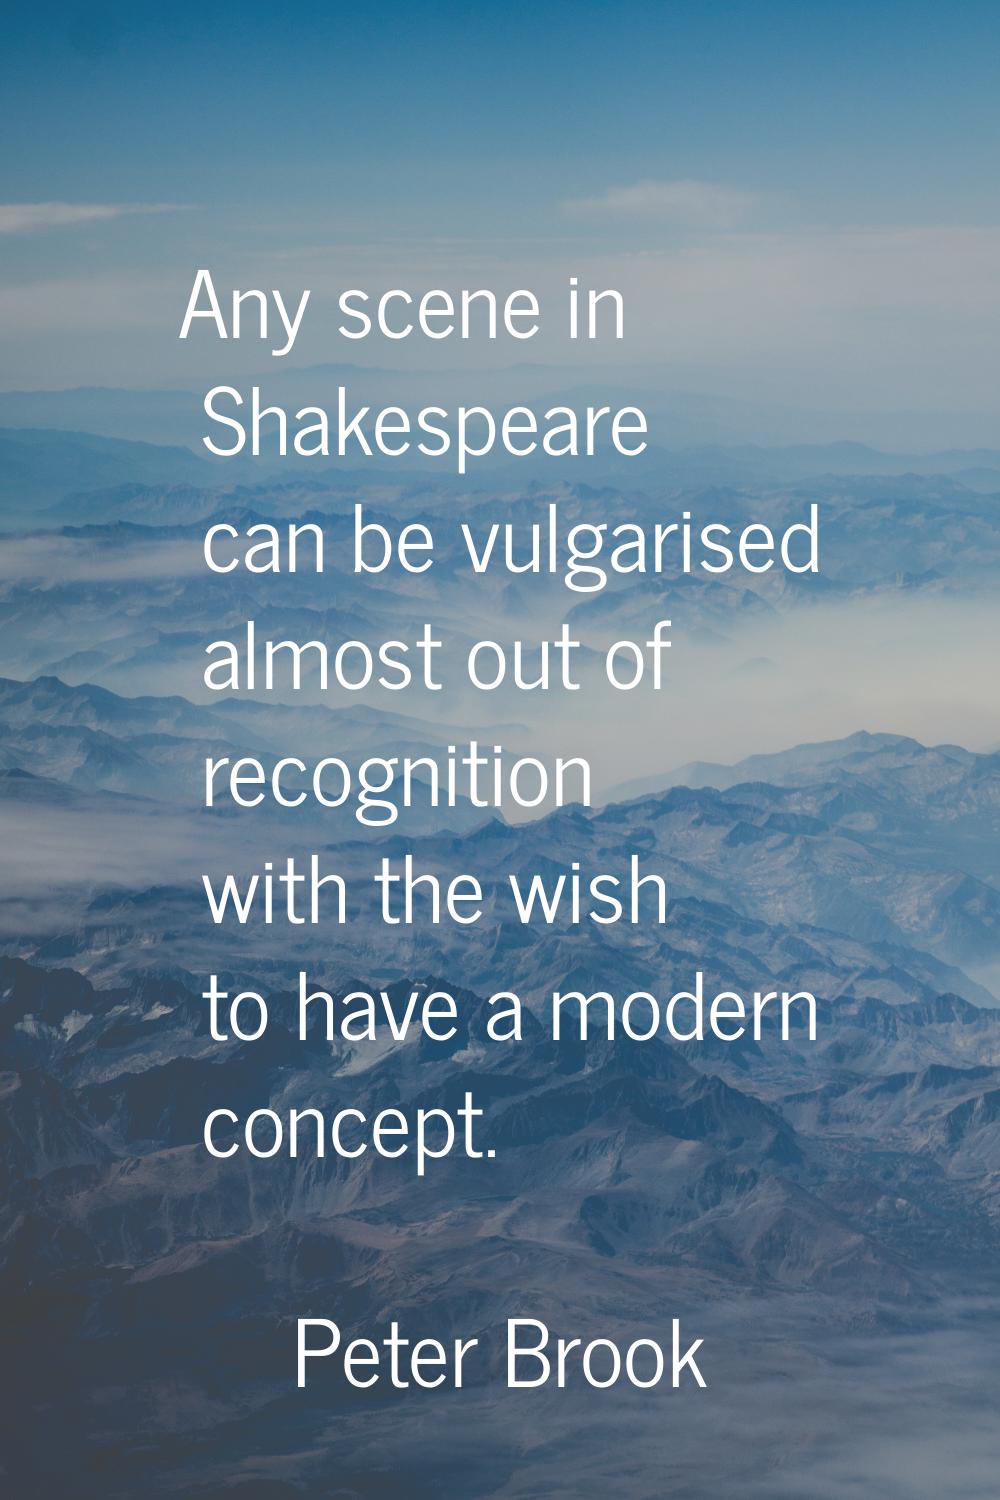 Any scene in Shakespeare can be vulgarised almost out of recognition with the wish to have a modern